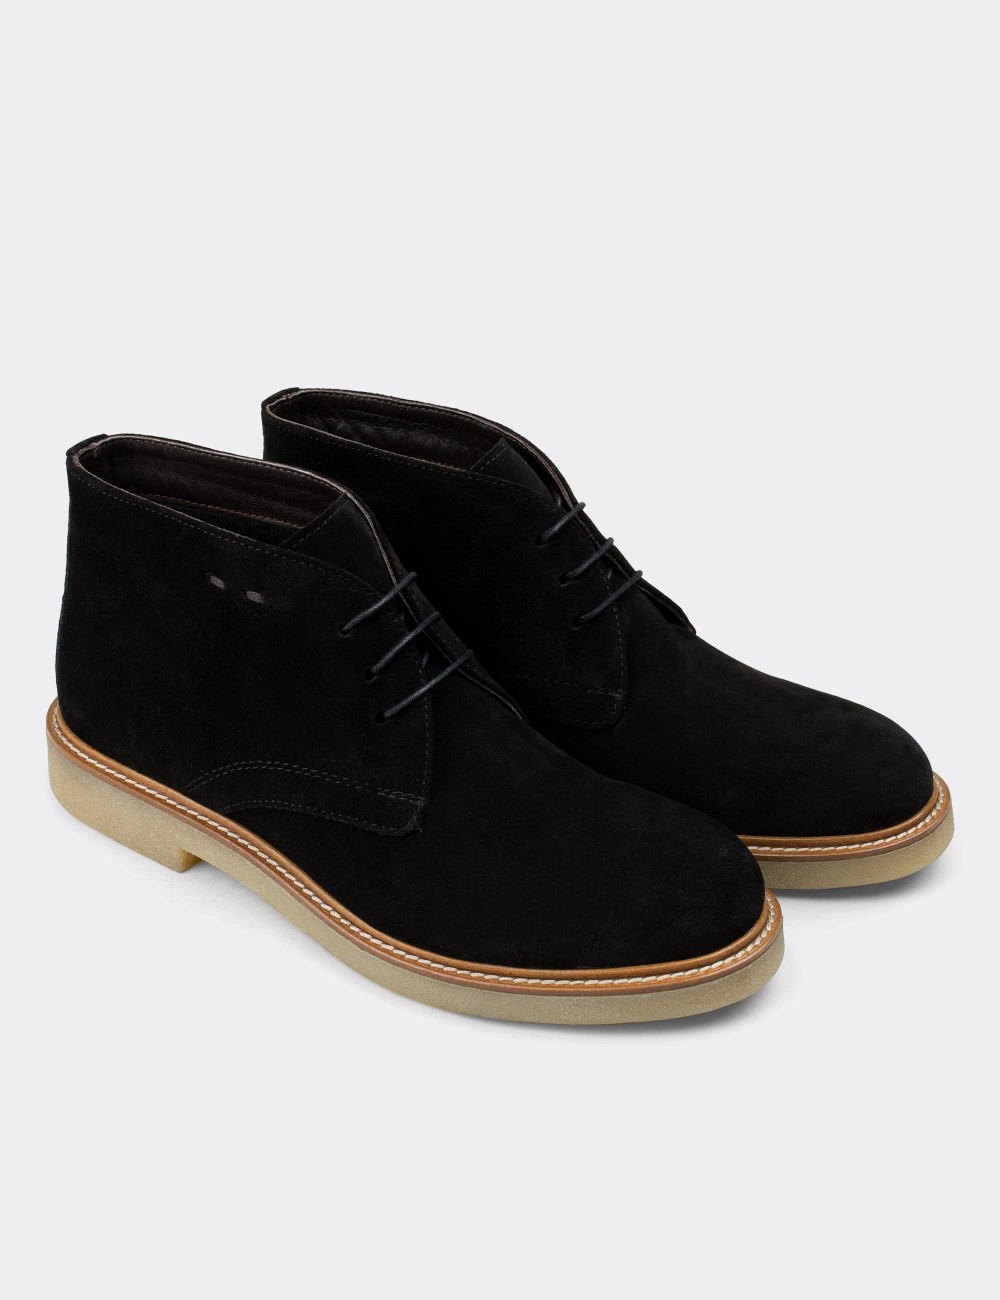 Black Suede Leather Desert Boots - 01295MSYHC10